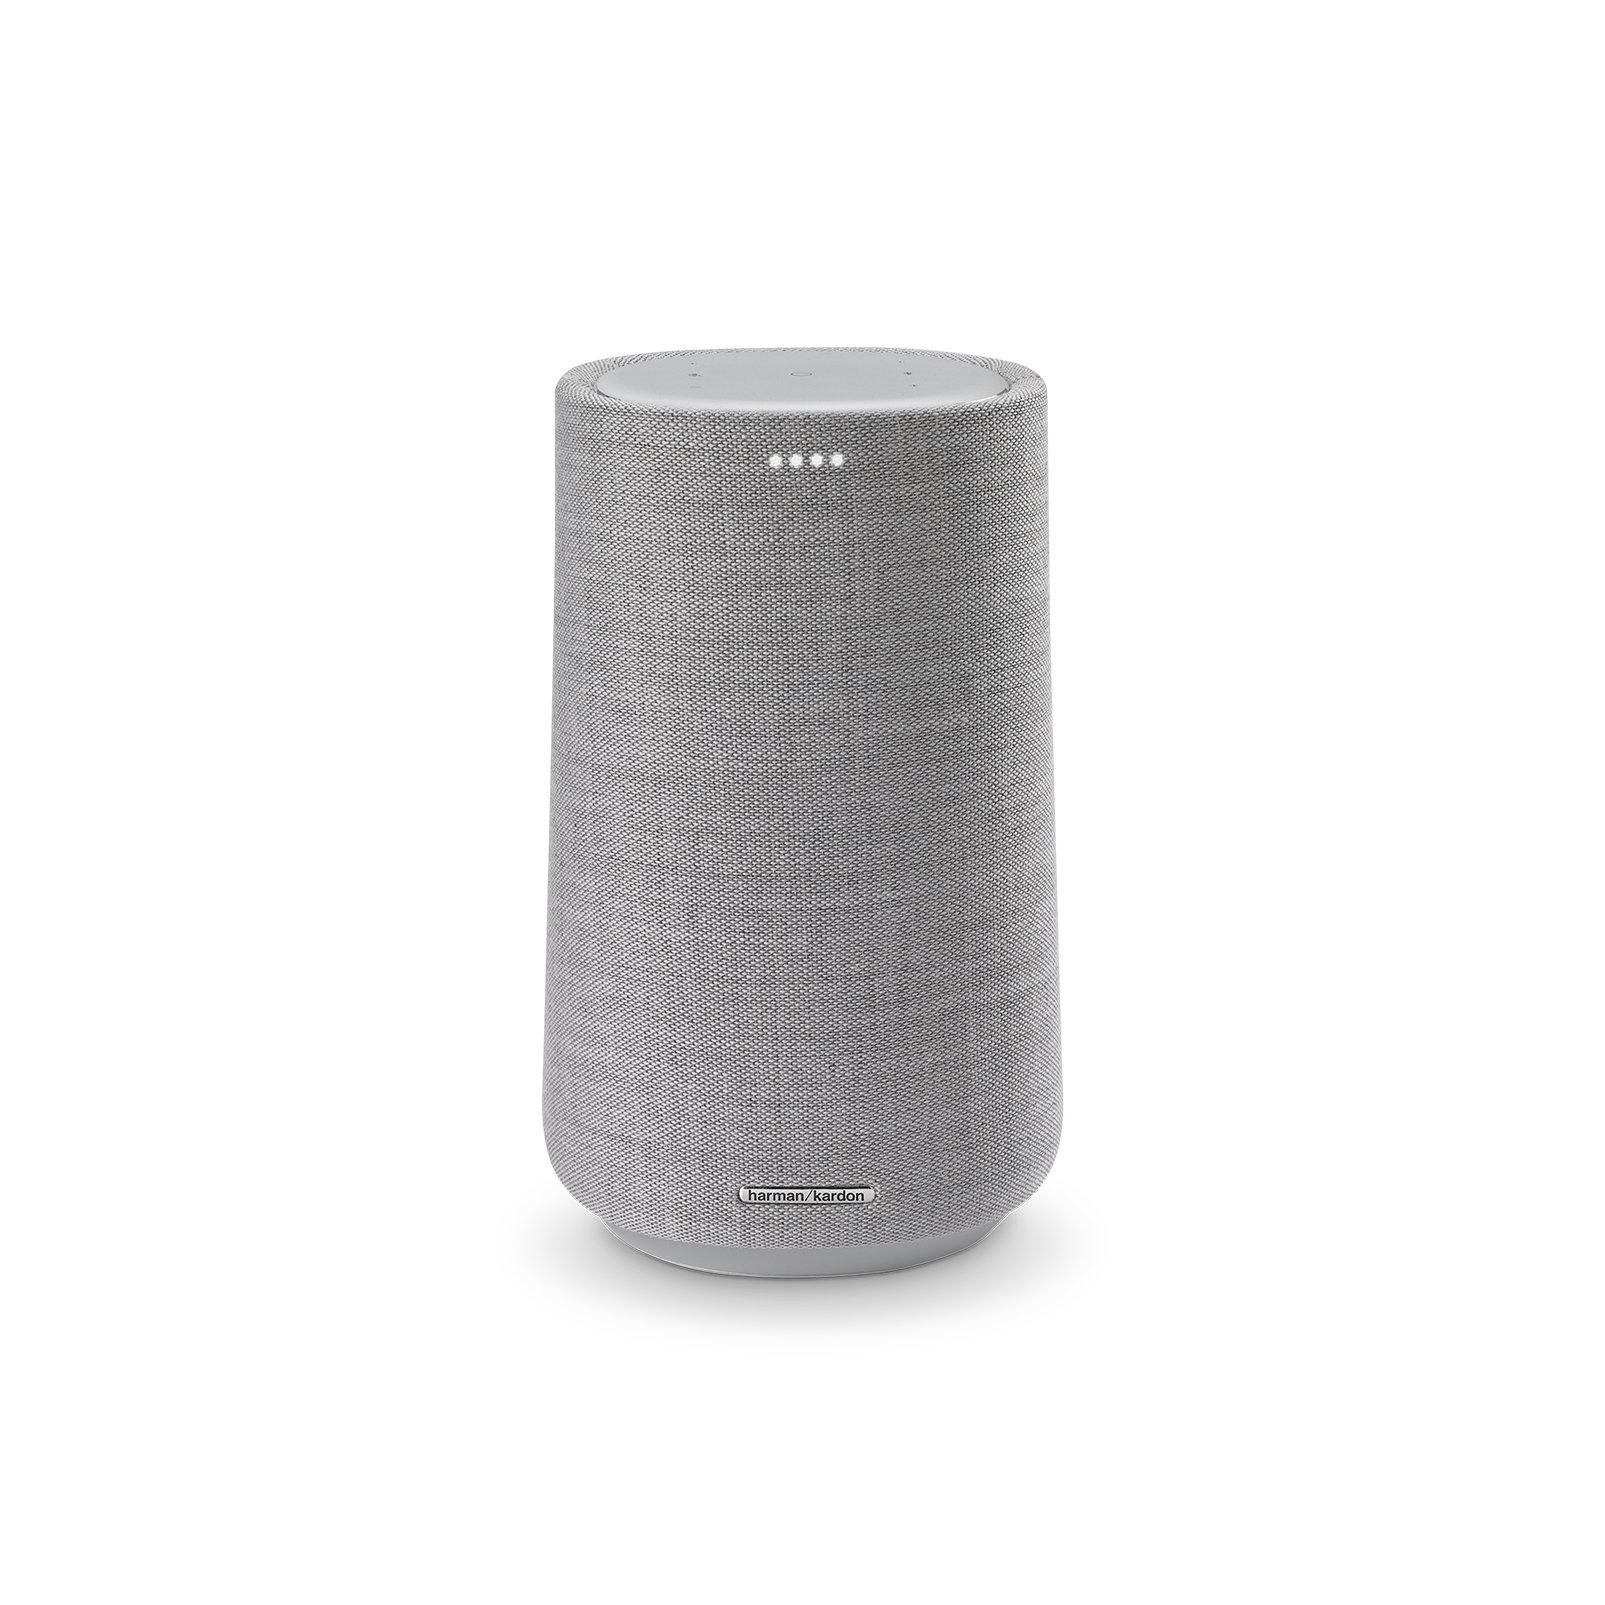 Harman Kardon Citation 100 MKII - Grey - Bring rich wireless sound to any space with the smart and compact Harman Kardon Citation 100 mkII. Its innovative features include AirPlay, Chromecast built-in and the Google Assistant. - Front